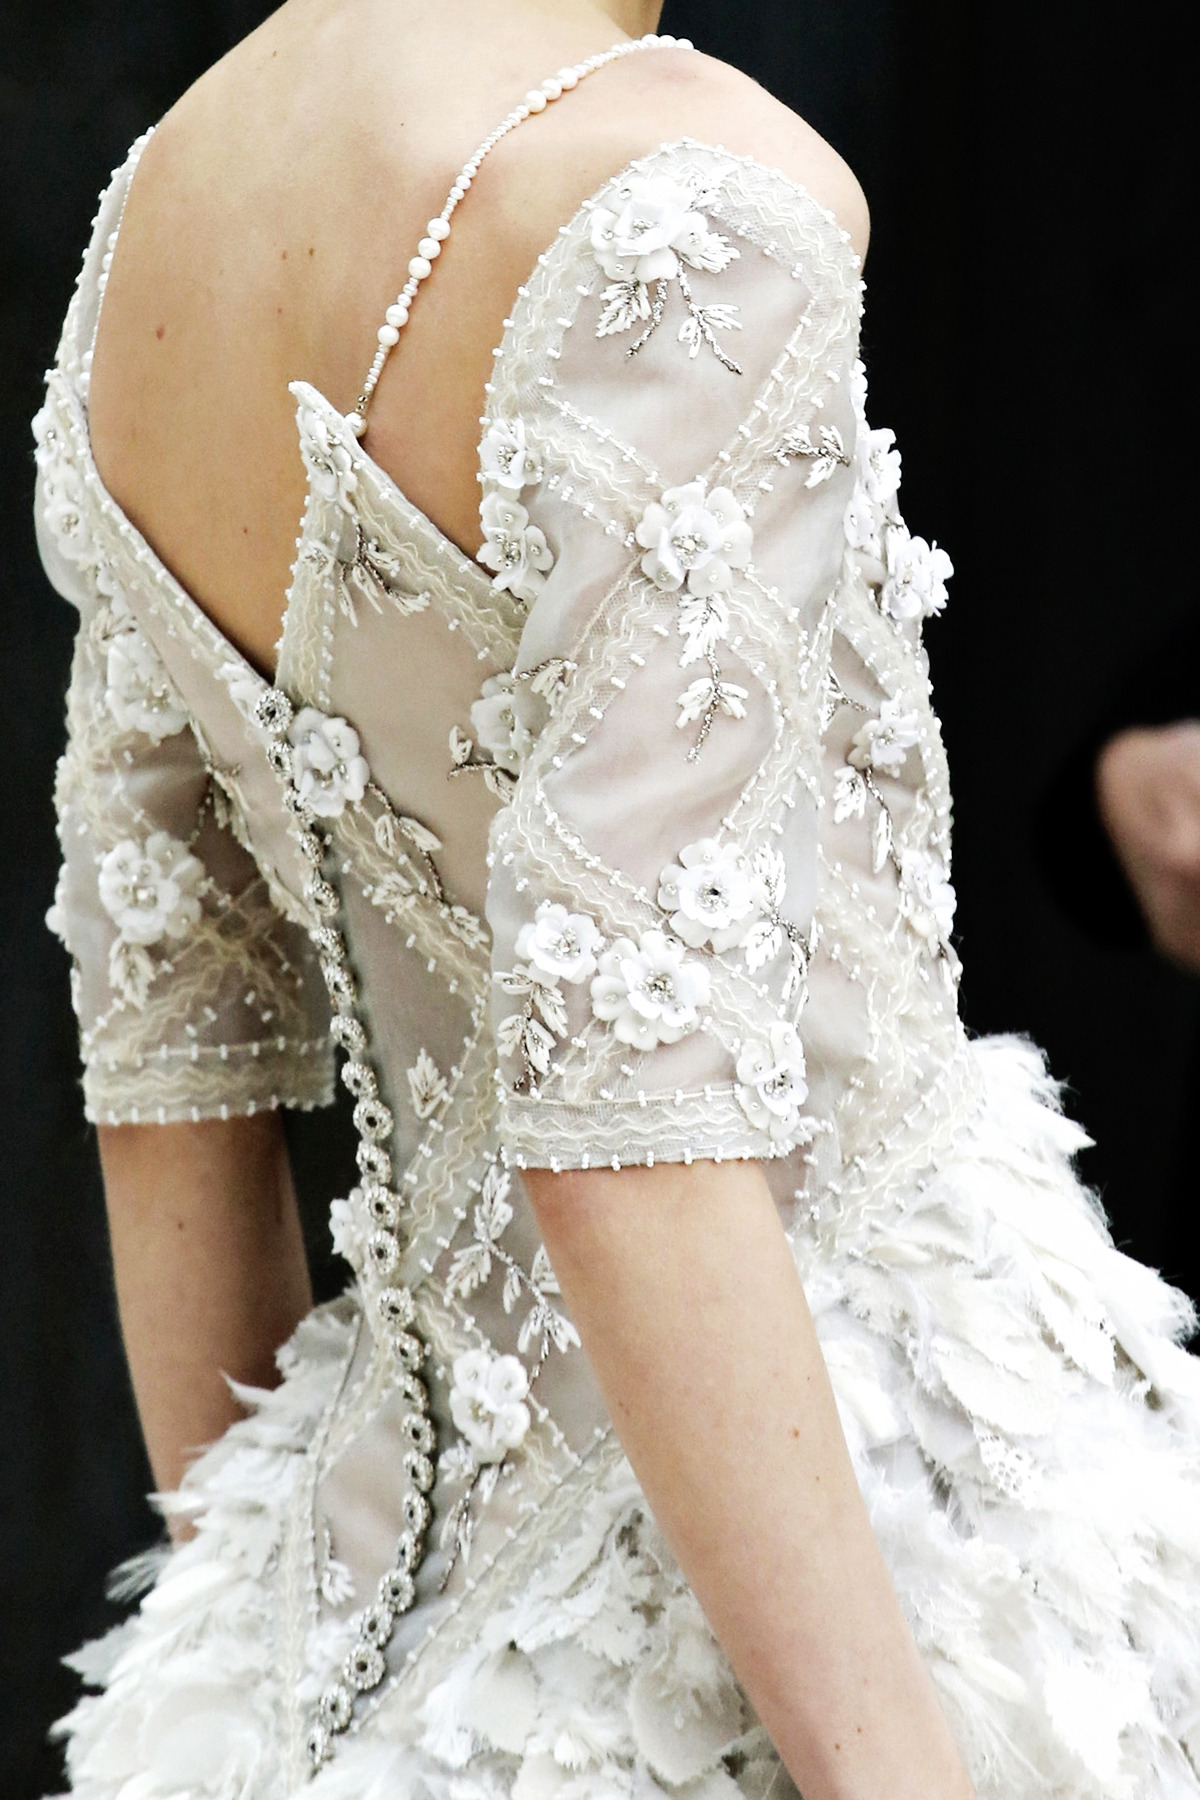 Chanel Haute Couture Spring/Summer 2013